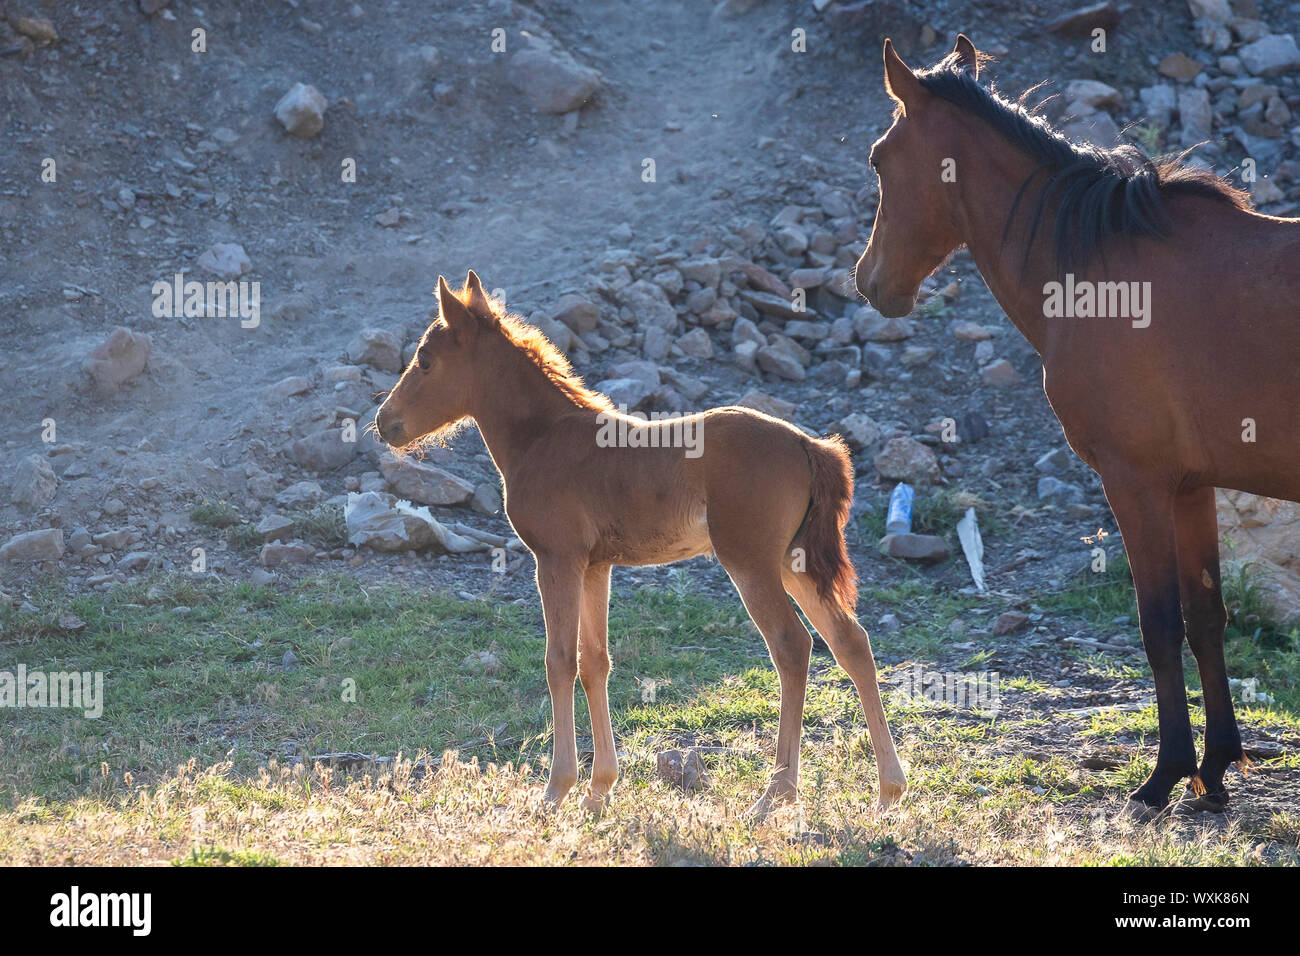 Feral horse, wild horse. Bay mare with foal standing in landscape. Turkey Stock Photo